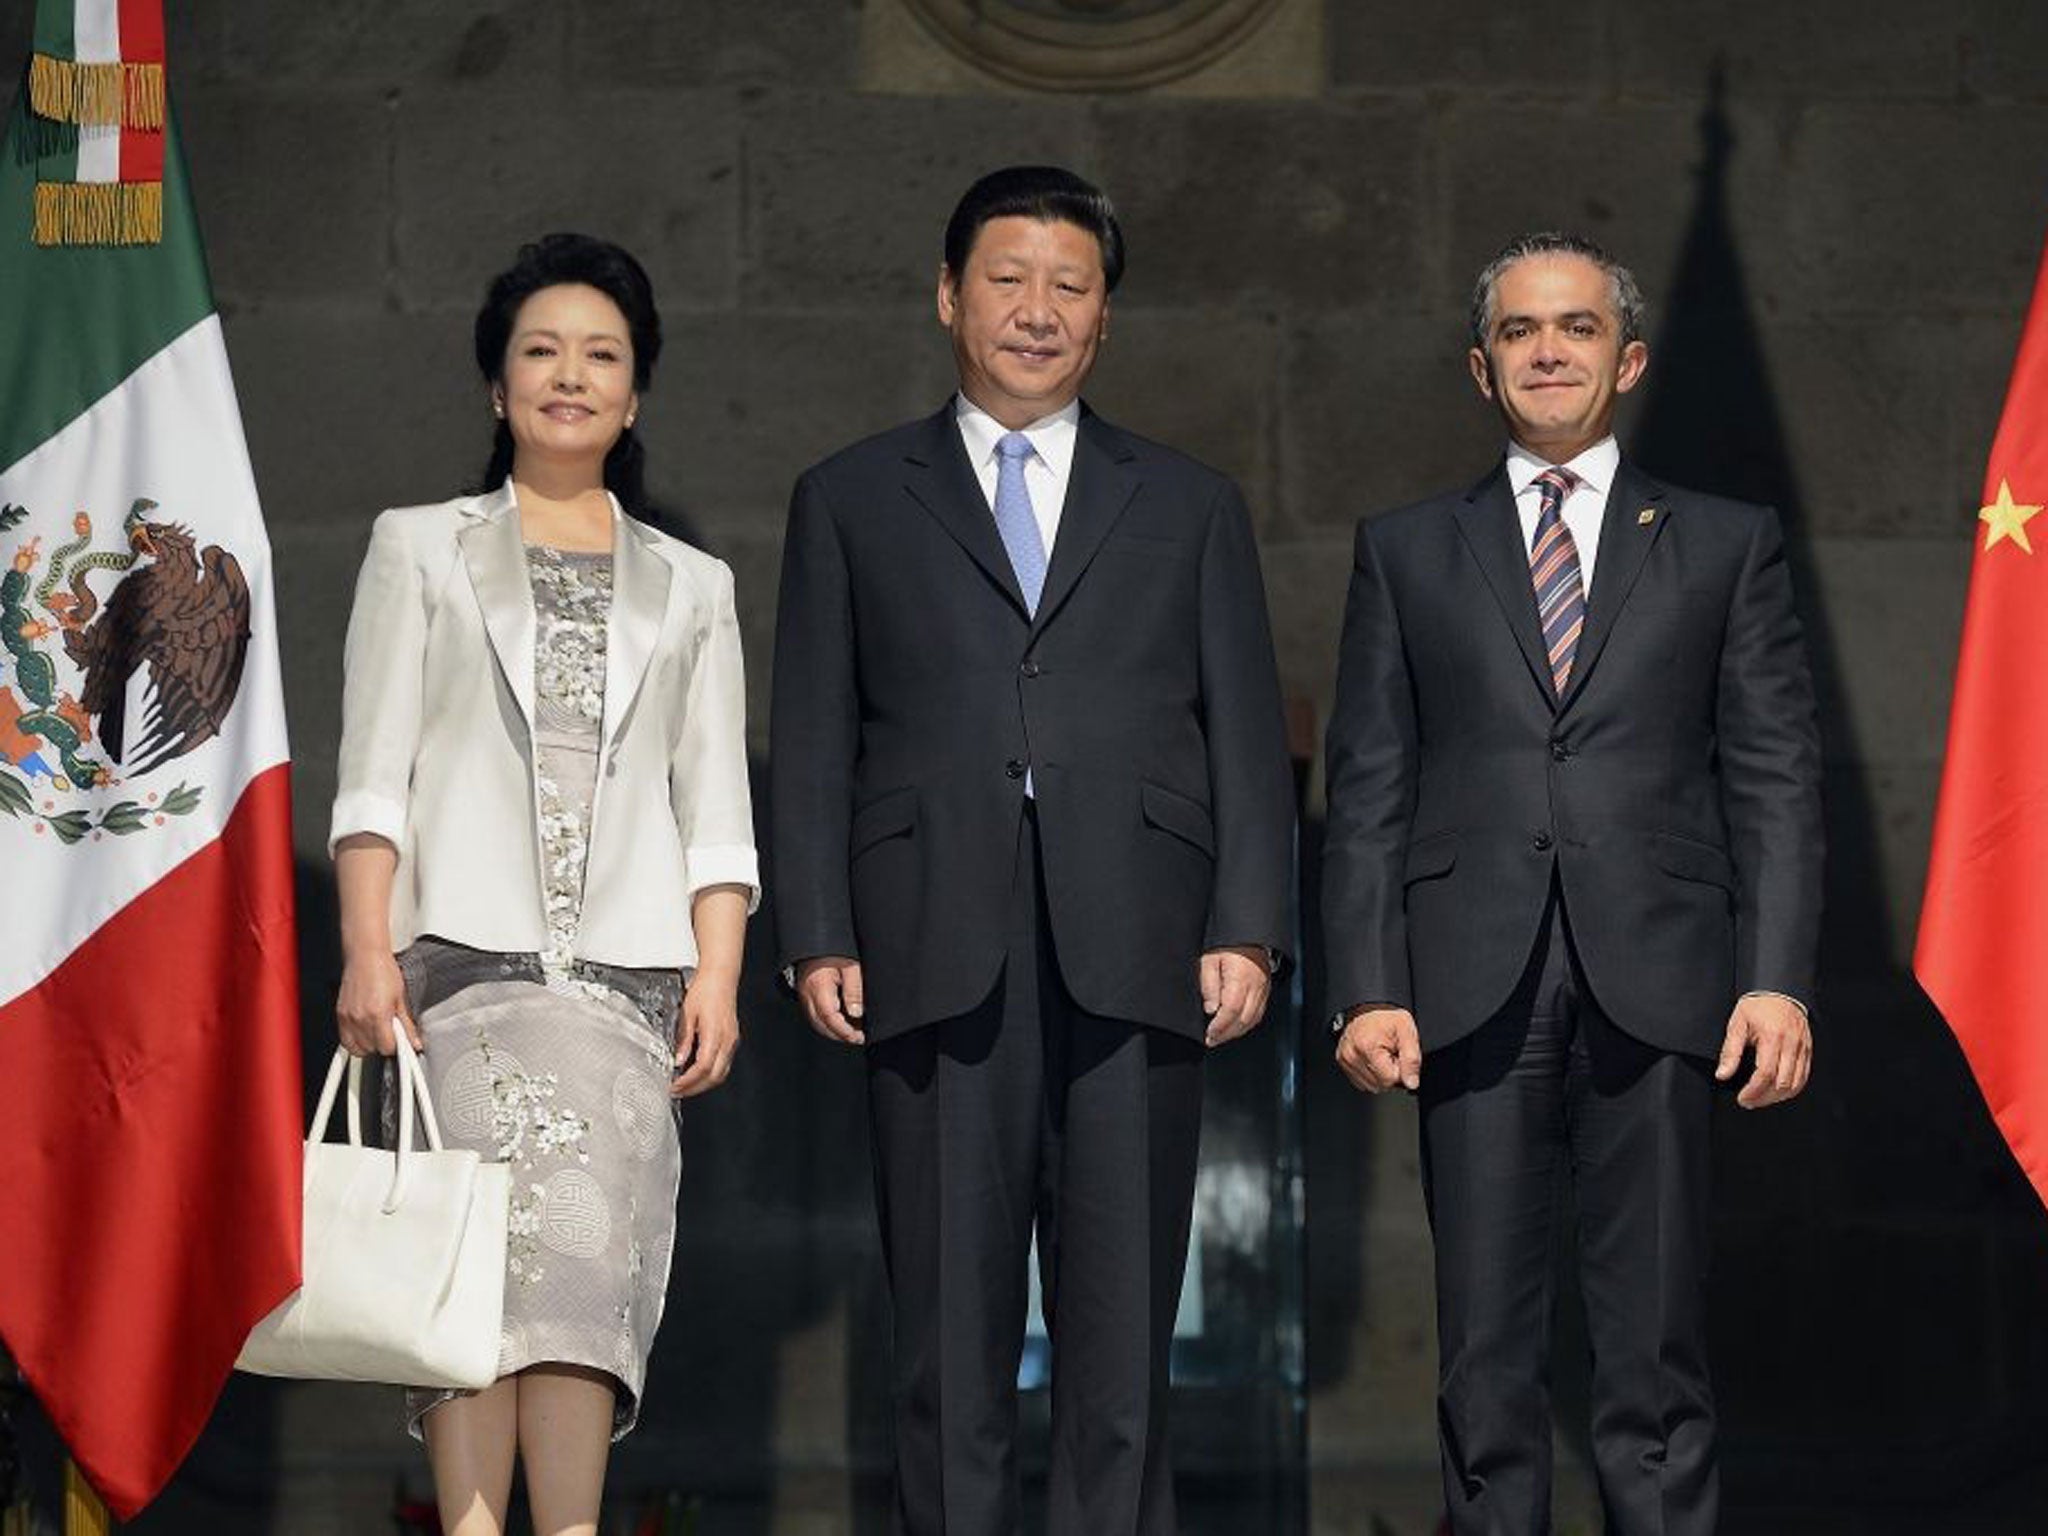 New direction: President Xi Jinping (pictured here with his wife and Mexico City's Mayor Miguel Mancera) is moving China away from state control of the investment process